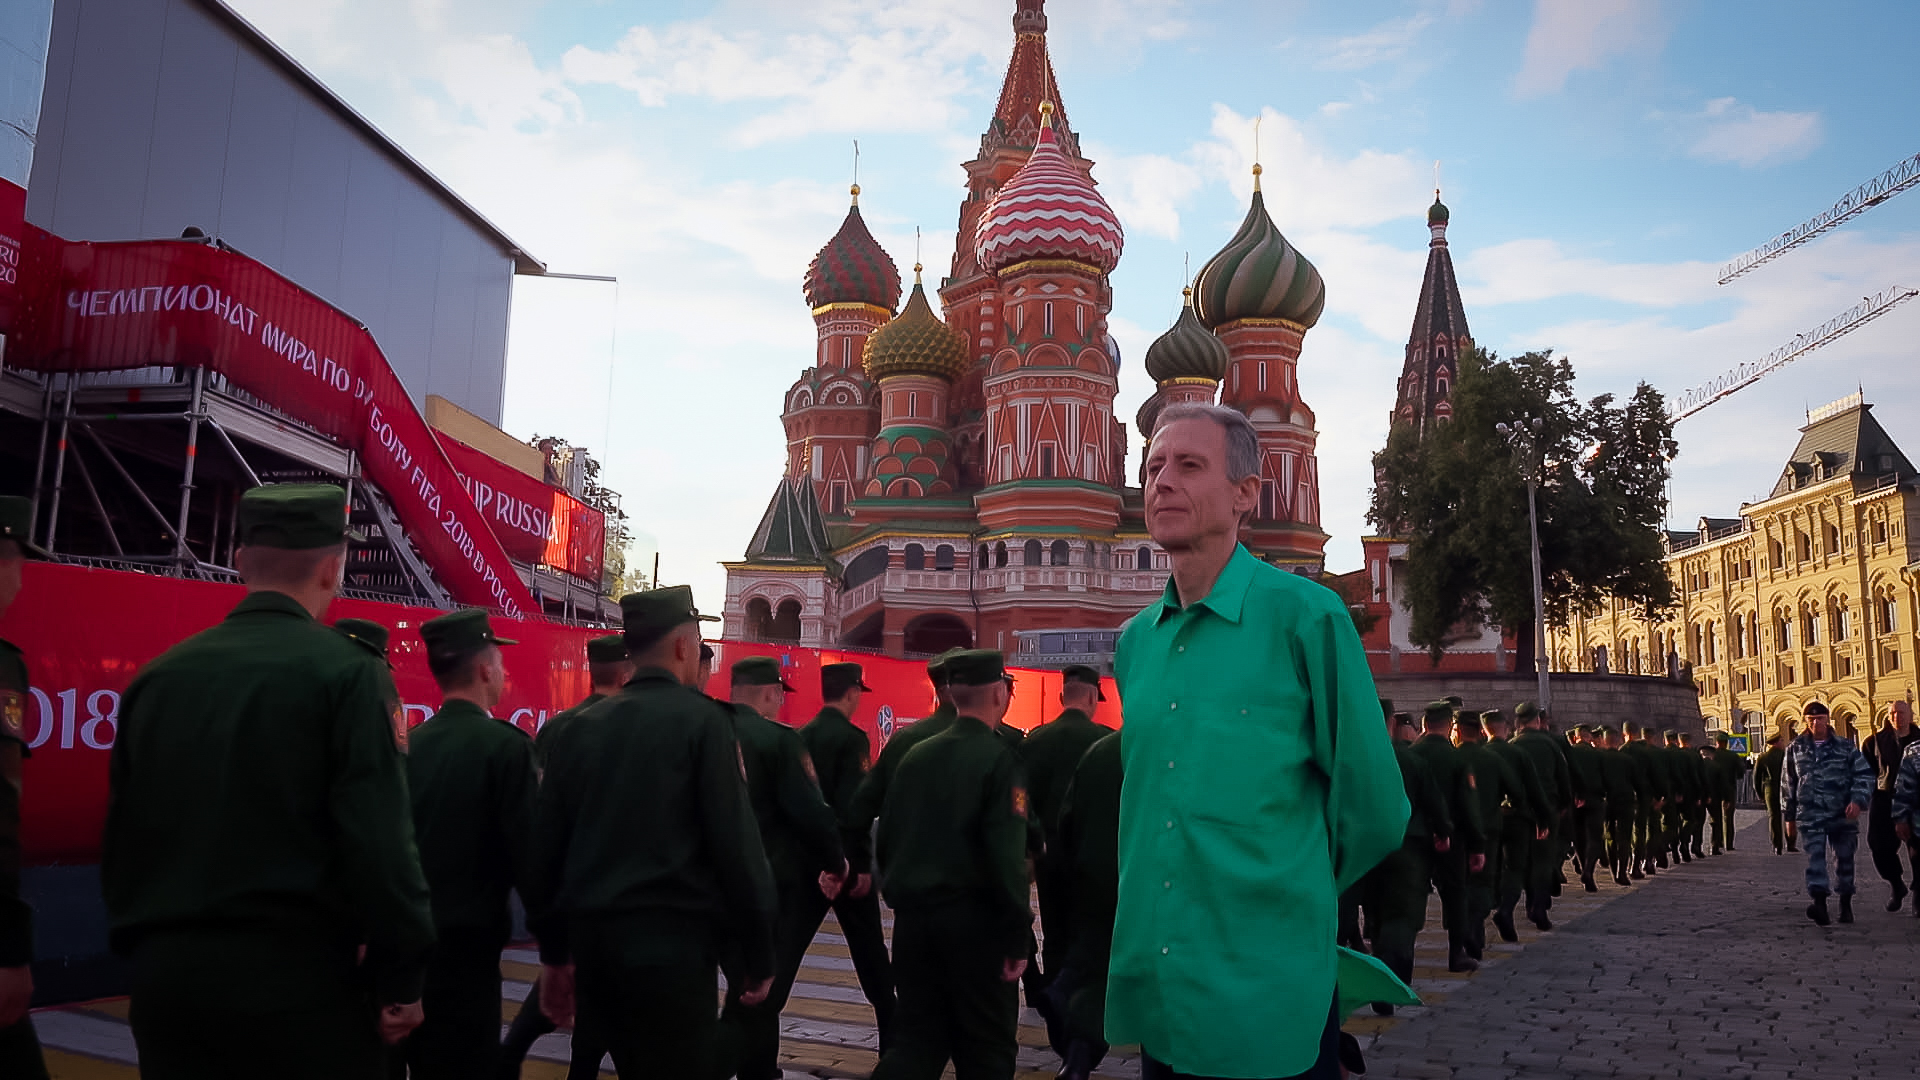 A man in a green shirt stands next to soldiers in Russia